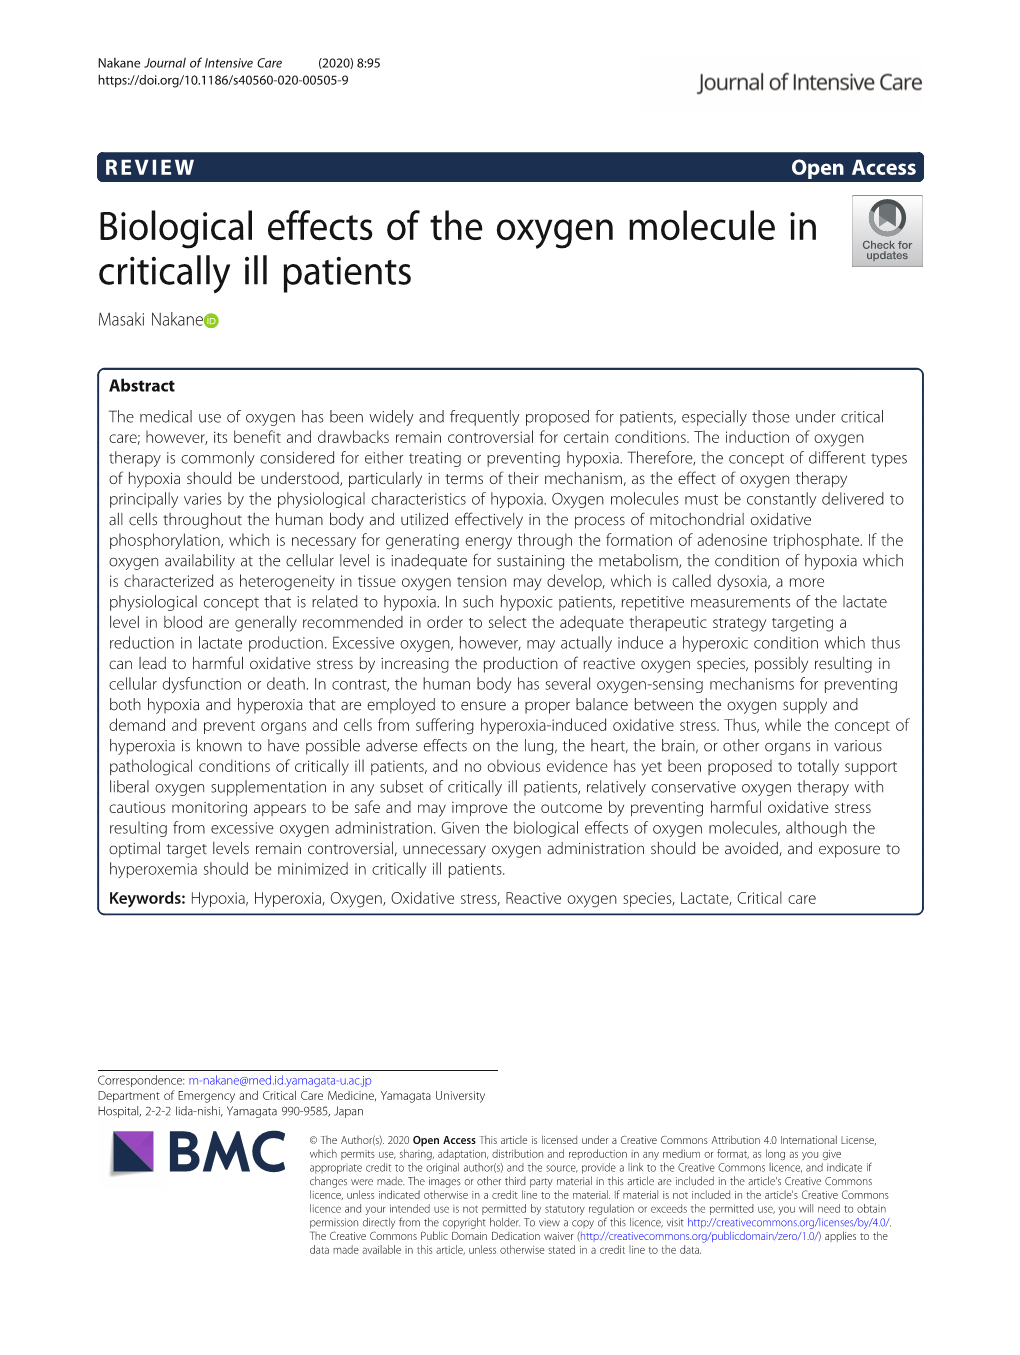 Biological Effects of the Oxygen Molecule in Critically Ill Patients Masaki Nakane